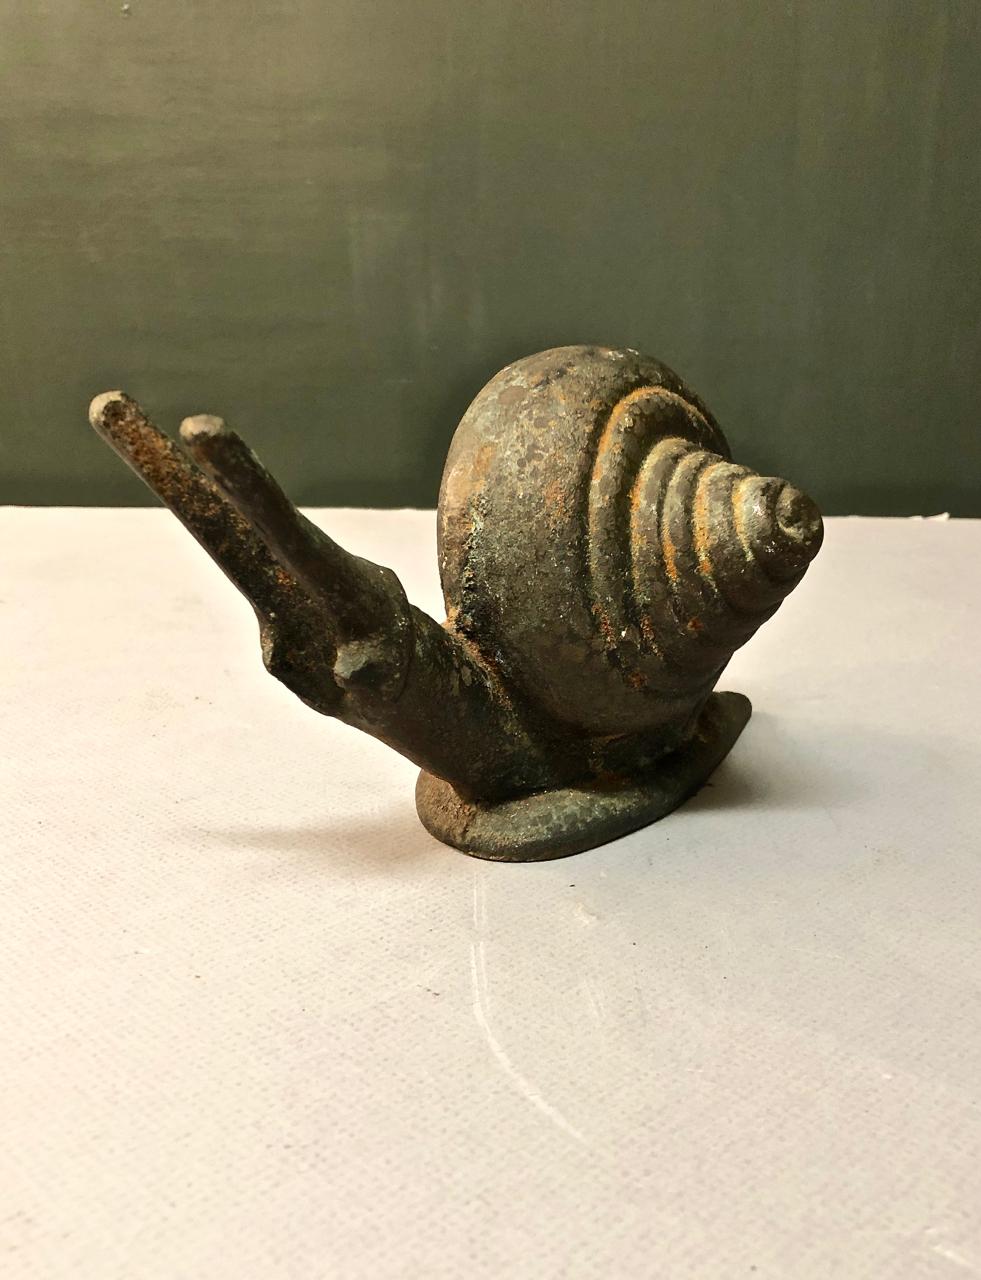 This is a charming cast iron sculpture, possibly a bookend or doorstop, of a garden snail. The snail exhibits lots of character, making it a great decorative element.